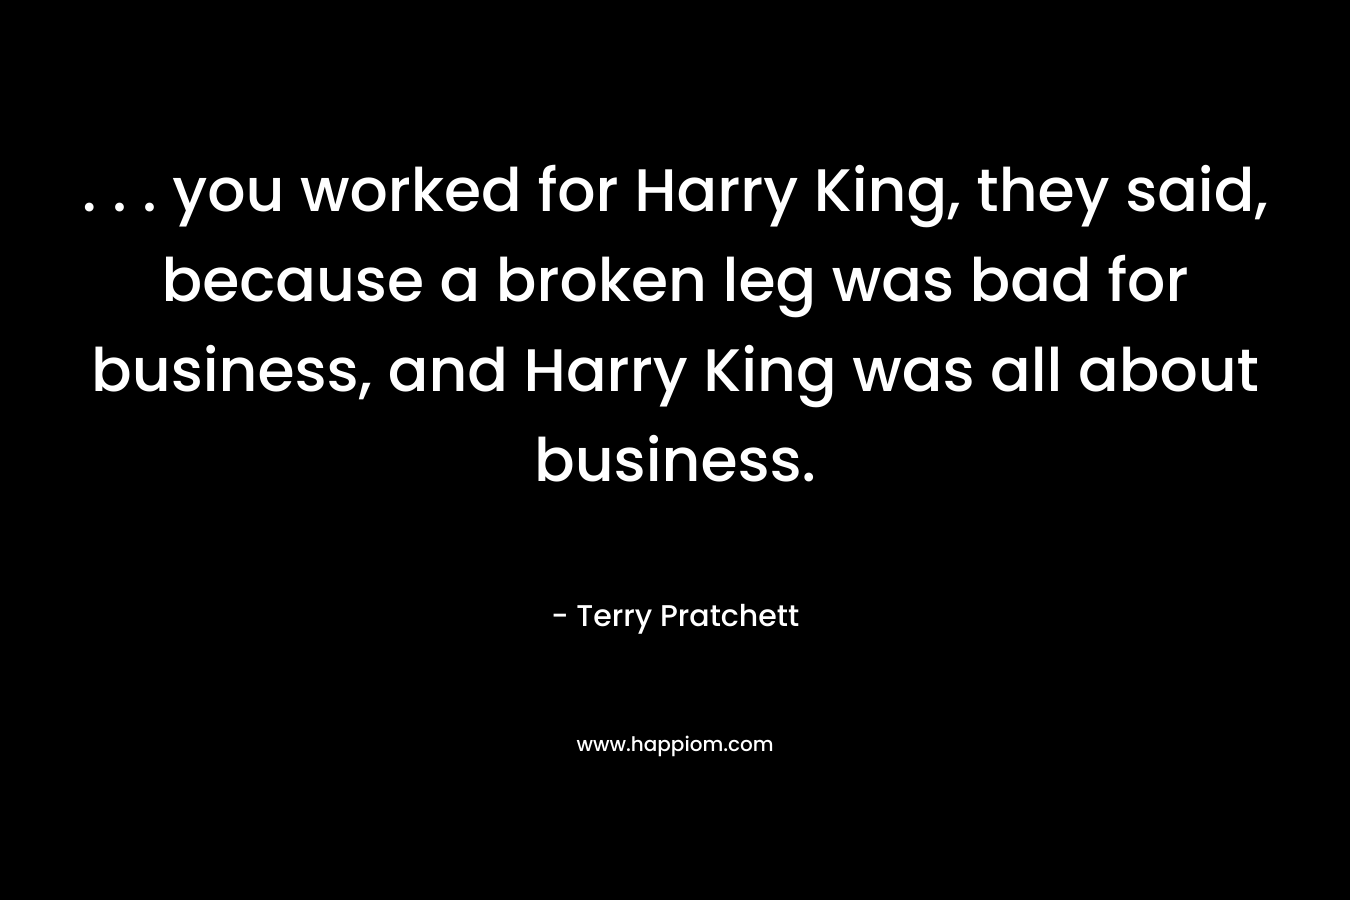 . . . you worked for Harry King, they said, because a broken leg was bad for business, and Harry King was all about business. – Terry Pratchett